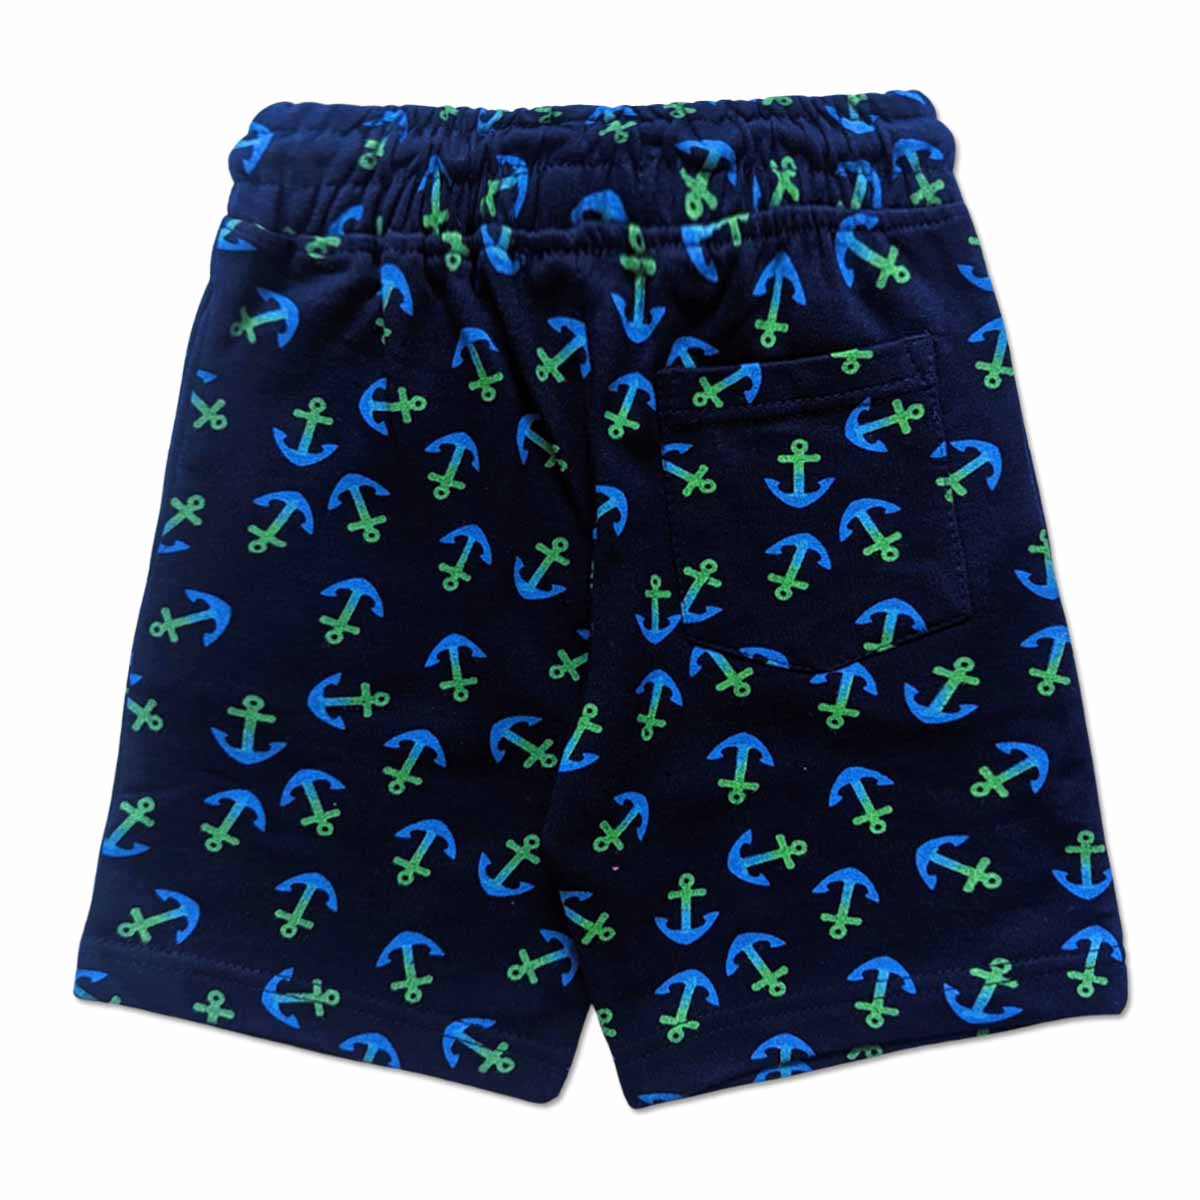 Brand Expo Premium Quality Branded Shorts for Boy's